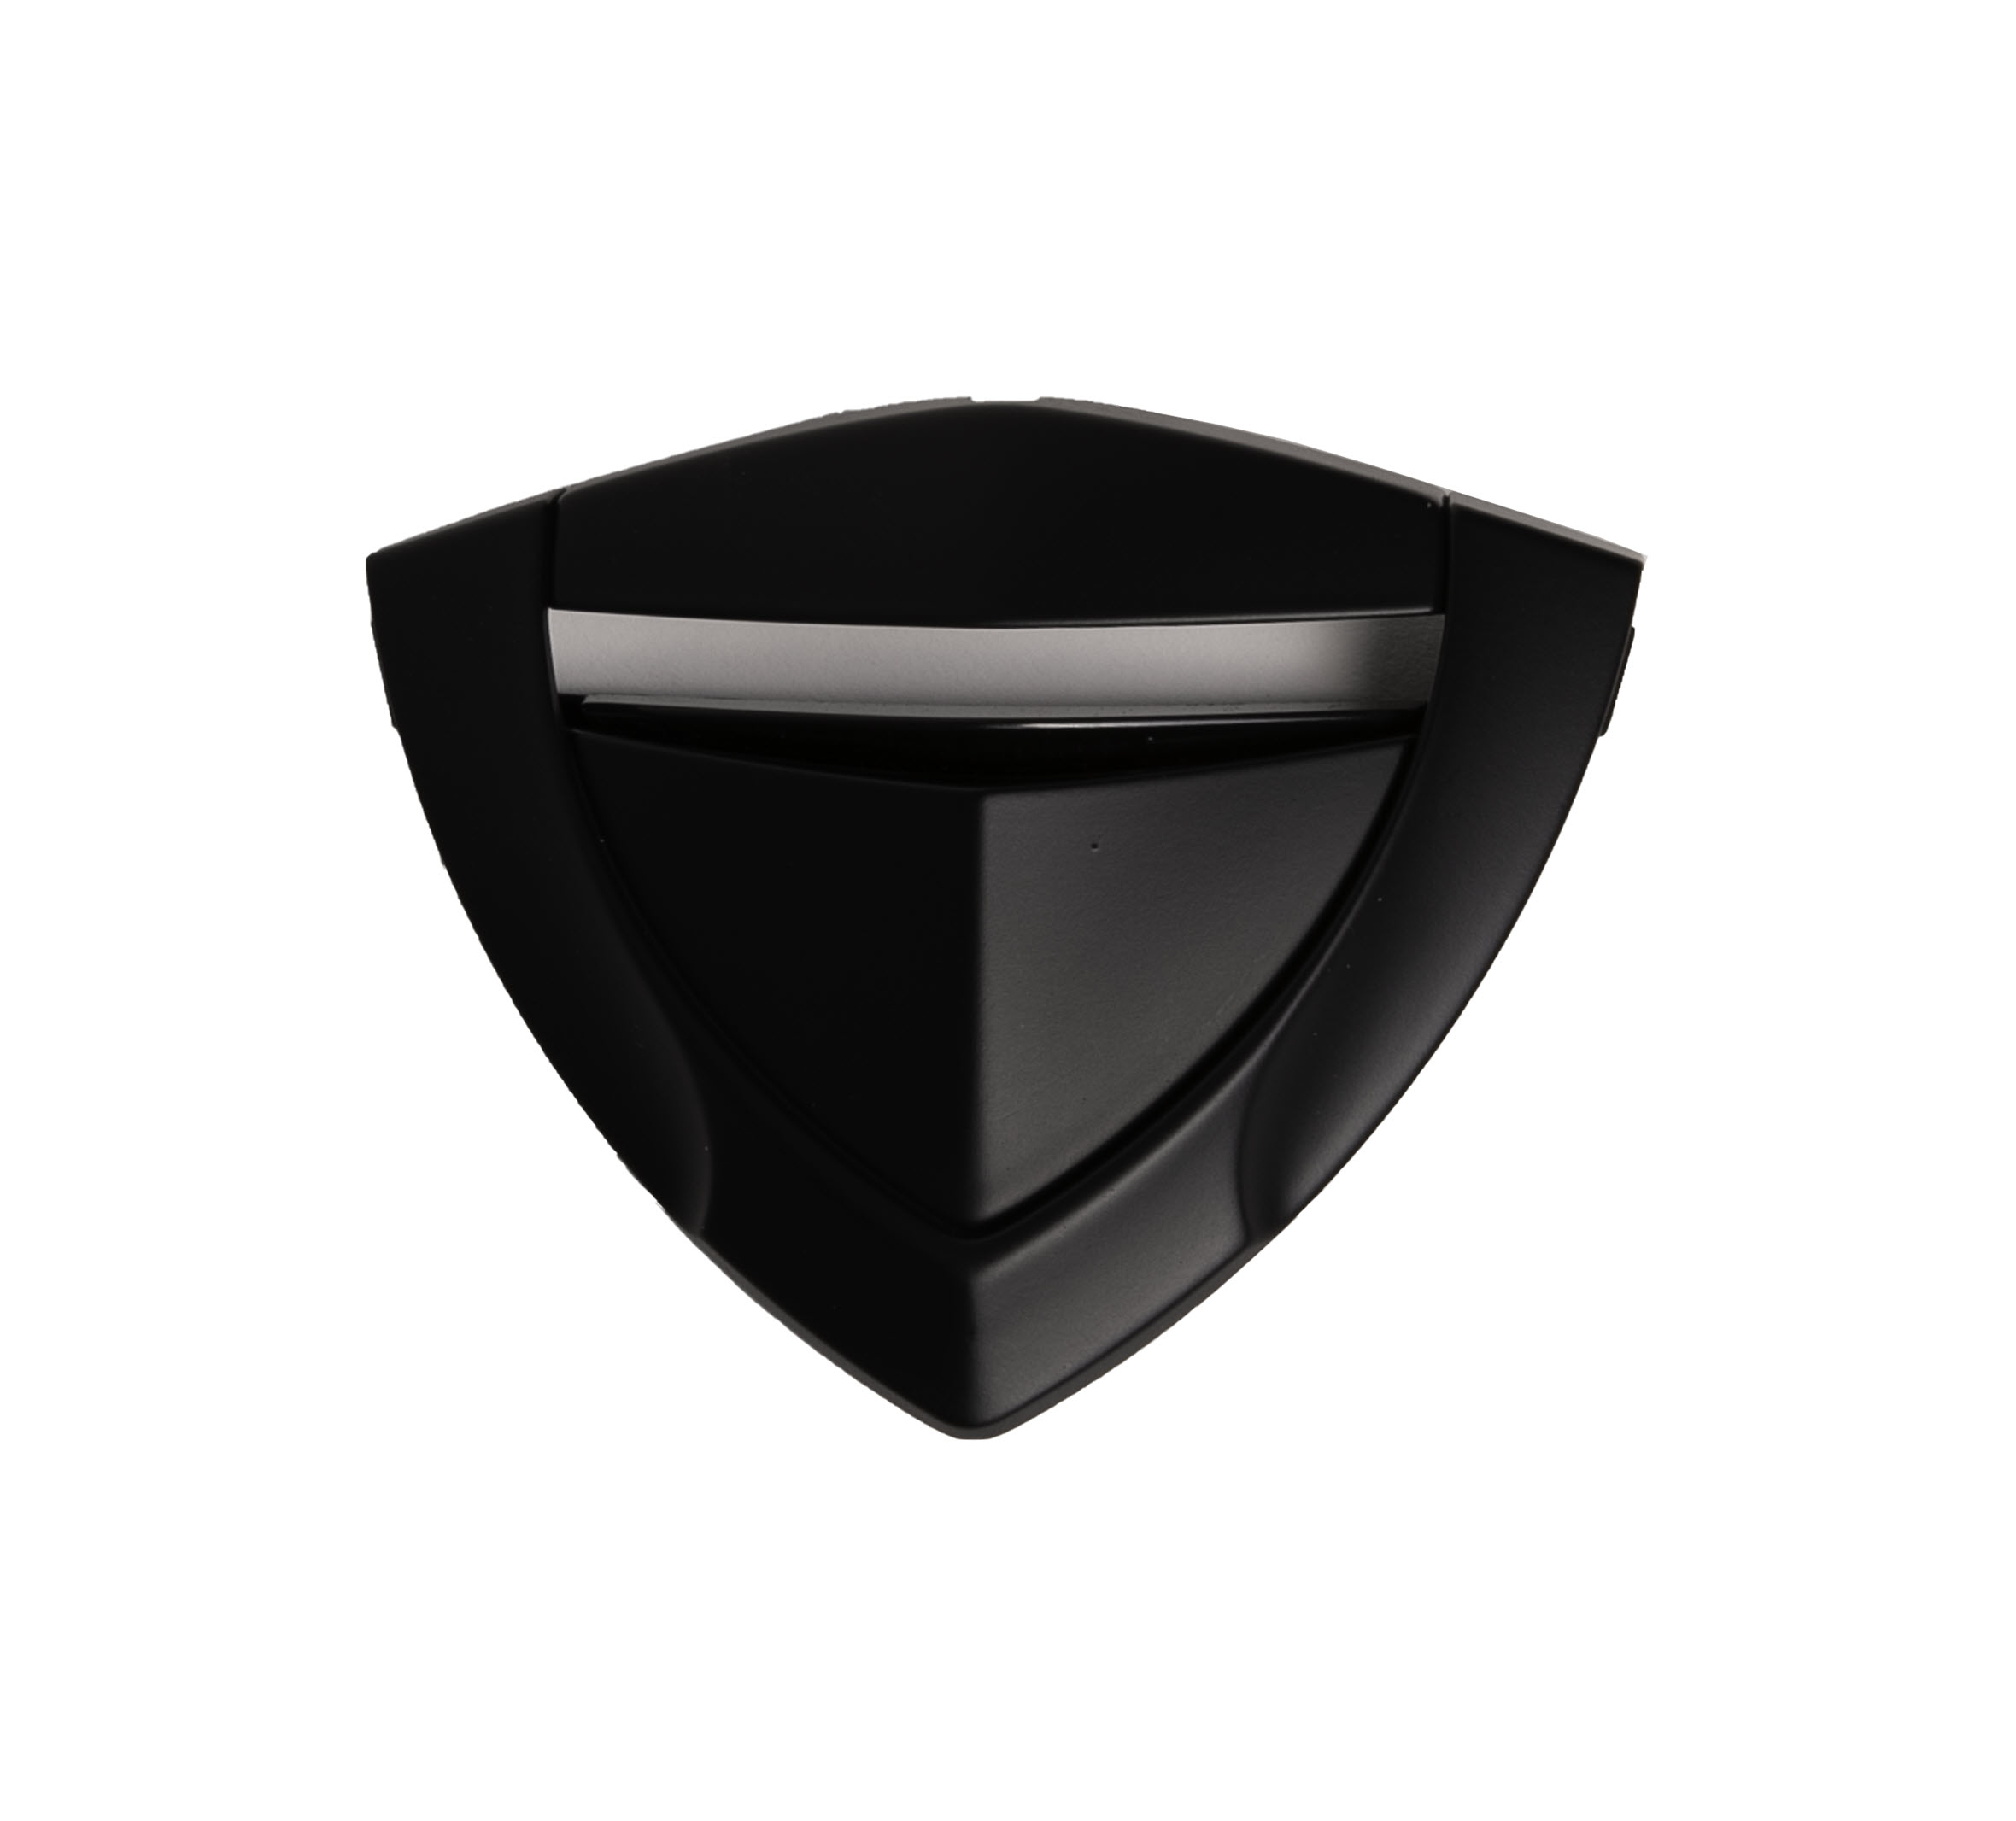 Harley-Davidson Replacement Low Vent Cover for FXRG Dual-Homologated Modular Helmet, Matte Black